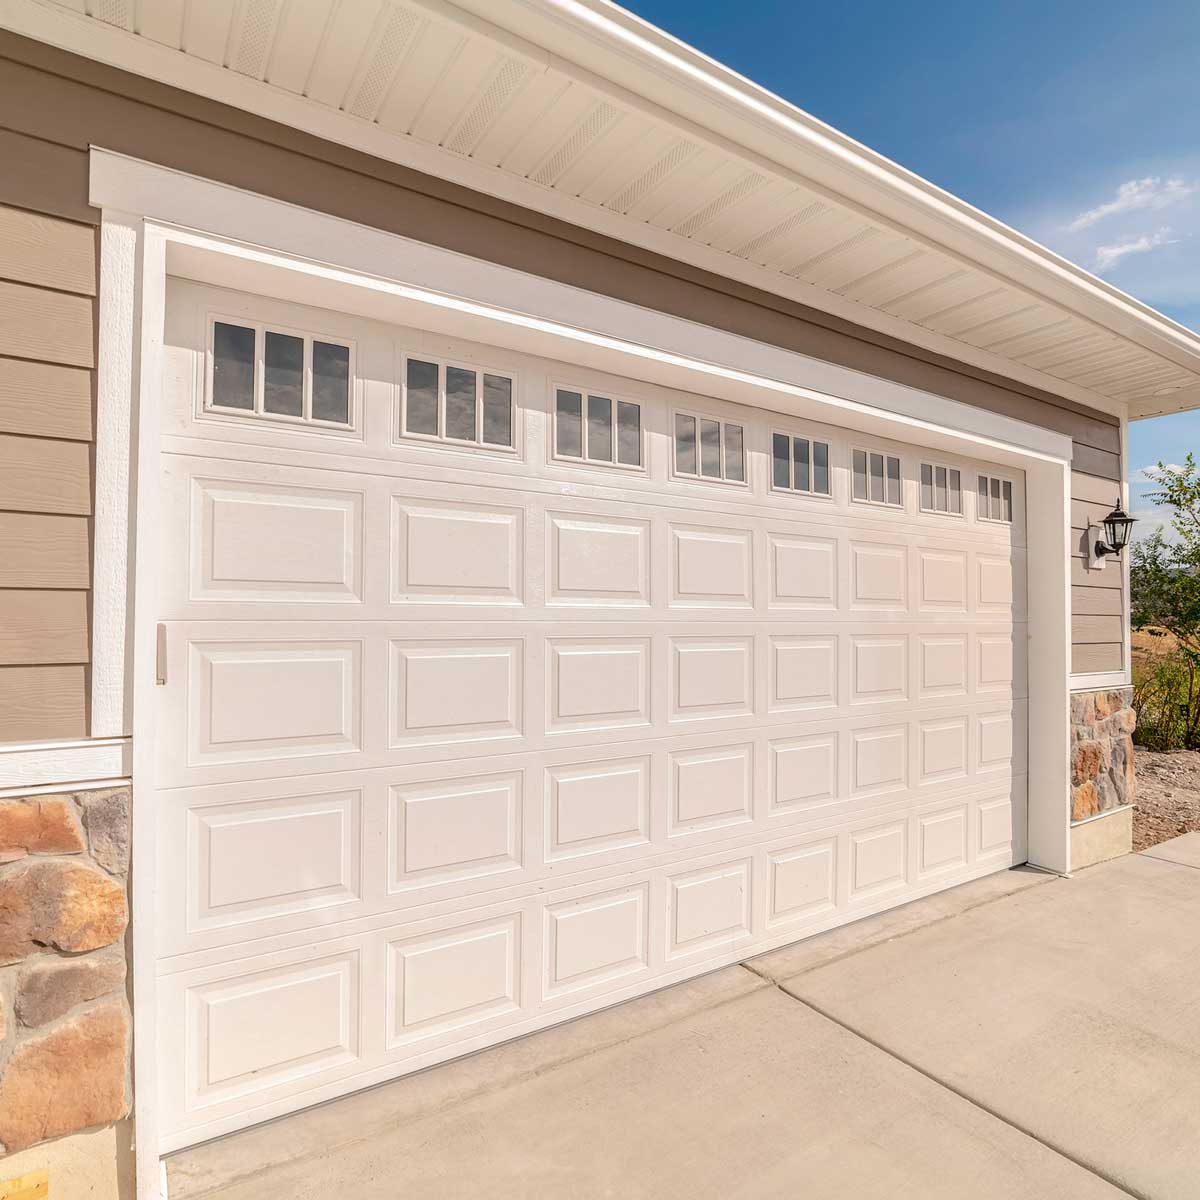 Converting A Garage Into Living Space, How Much Does It Cost To Convert A Garage Into Living Room